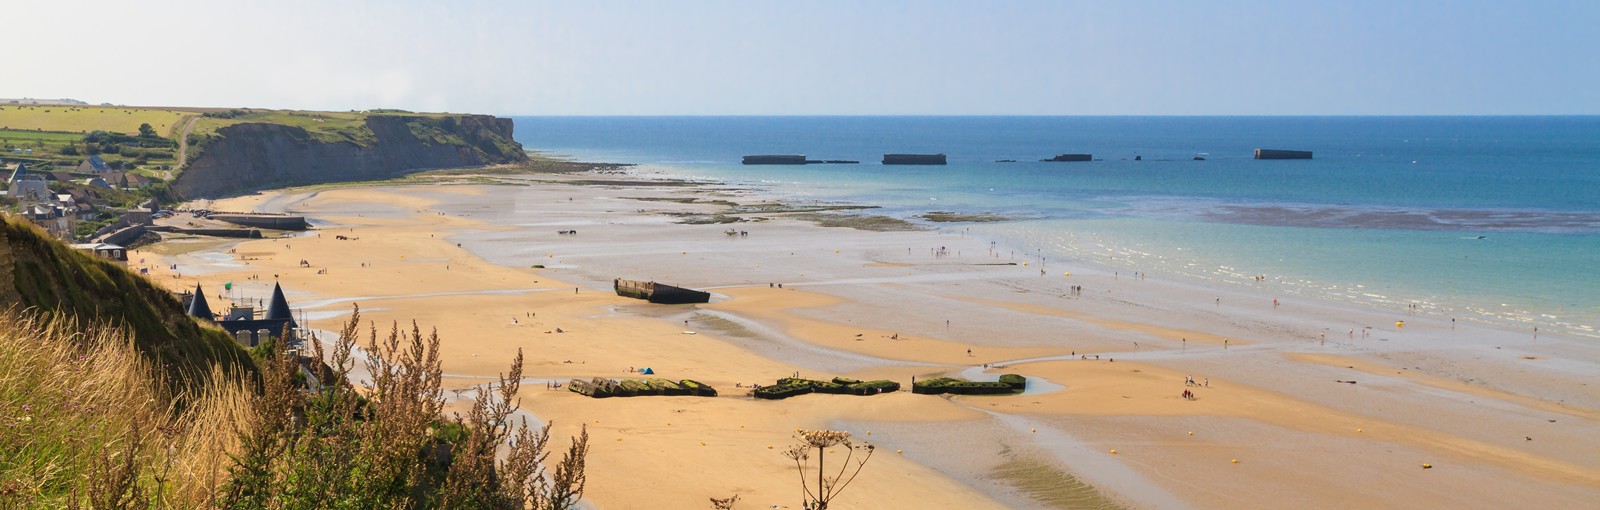 The Landing beaches of Normandy